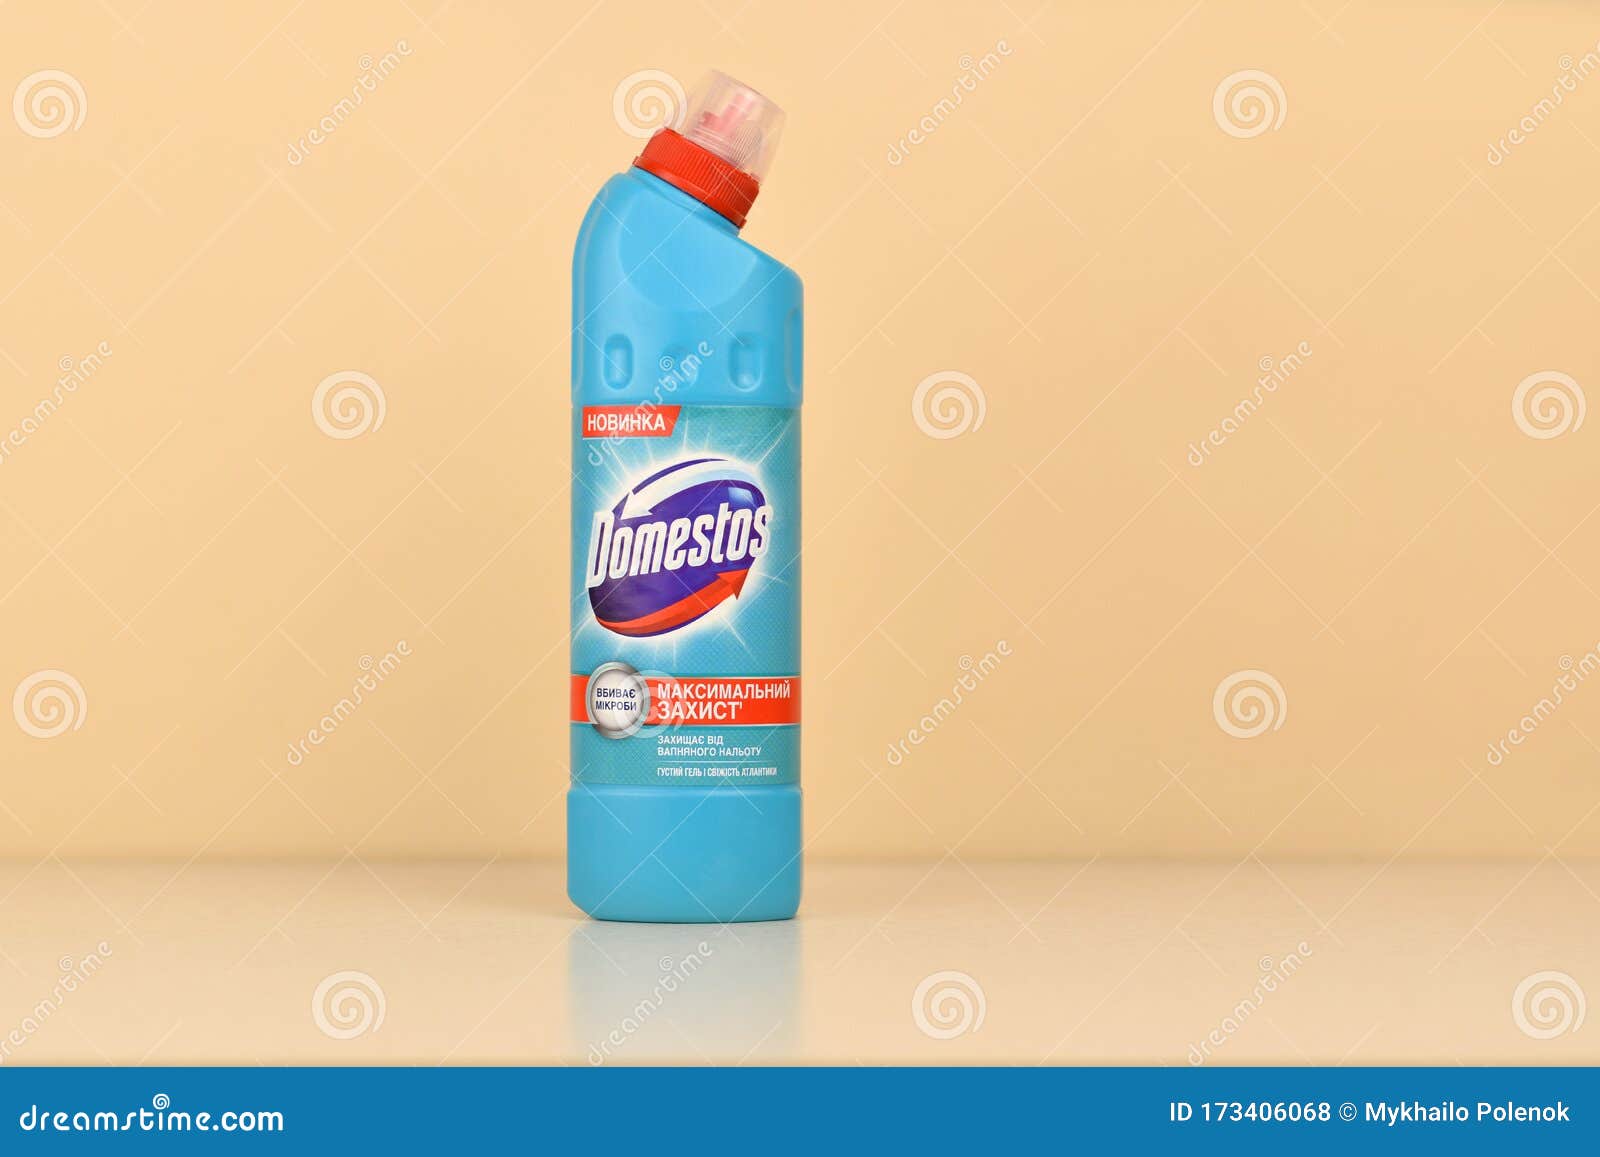 Domestos Blue Bottle Domestos Is A Household Cleaning Range Which Contains Bleach Manufactured By Unilever Editorial Stock Photo Image Of Hygiene Freshen 173406068